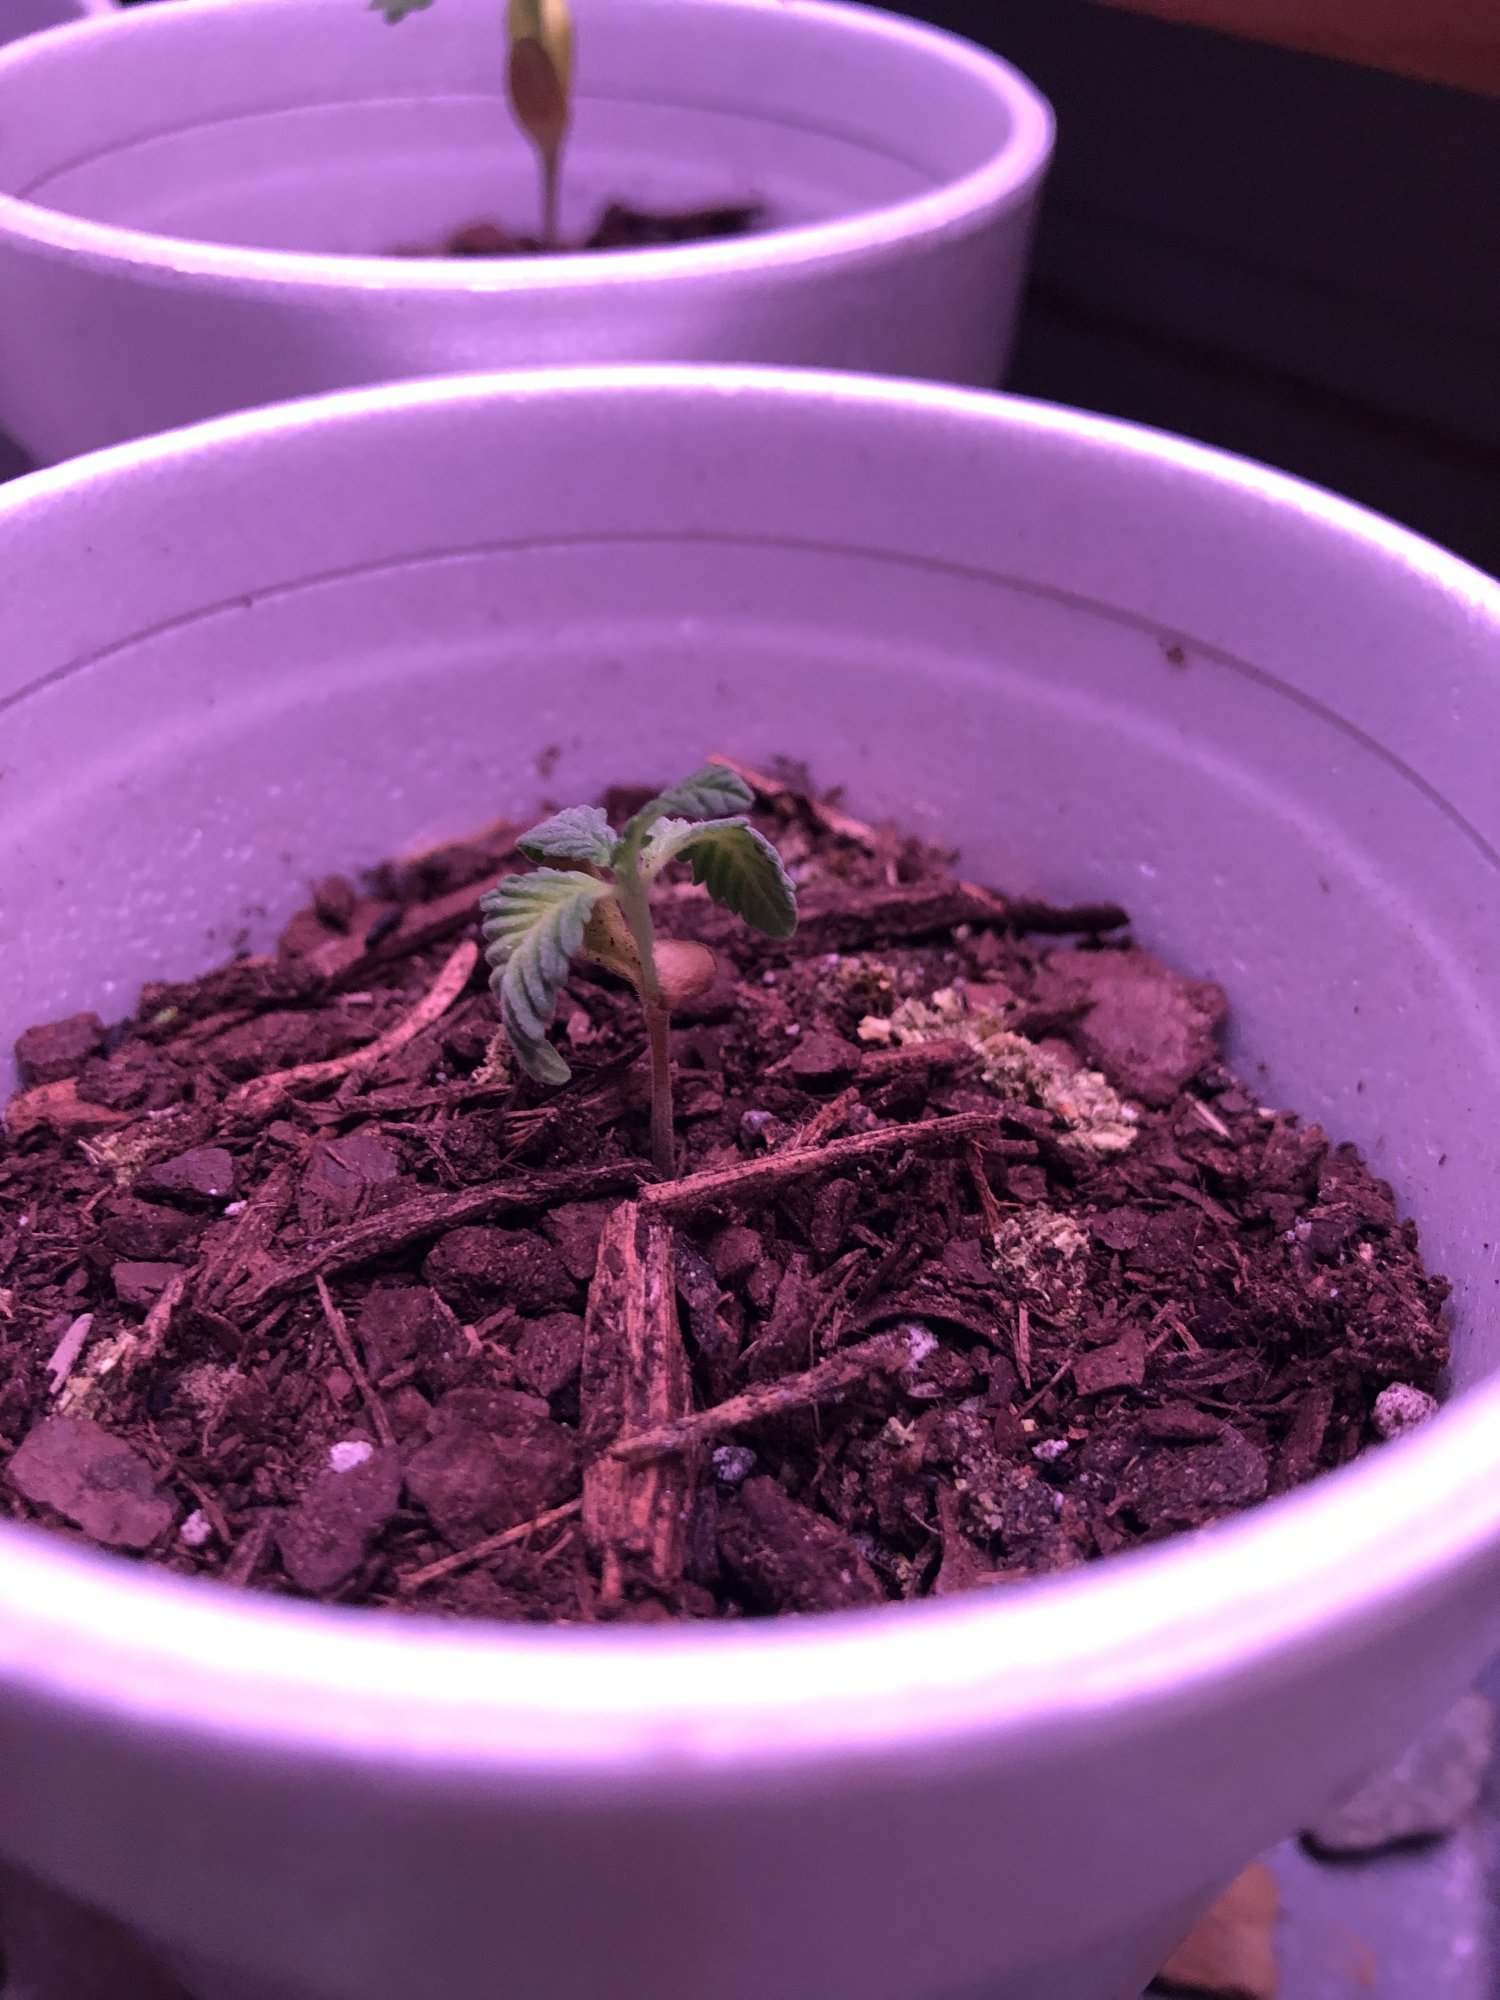 Droopy seedling